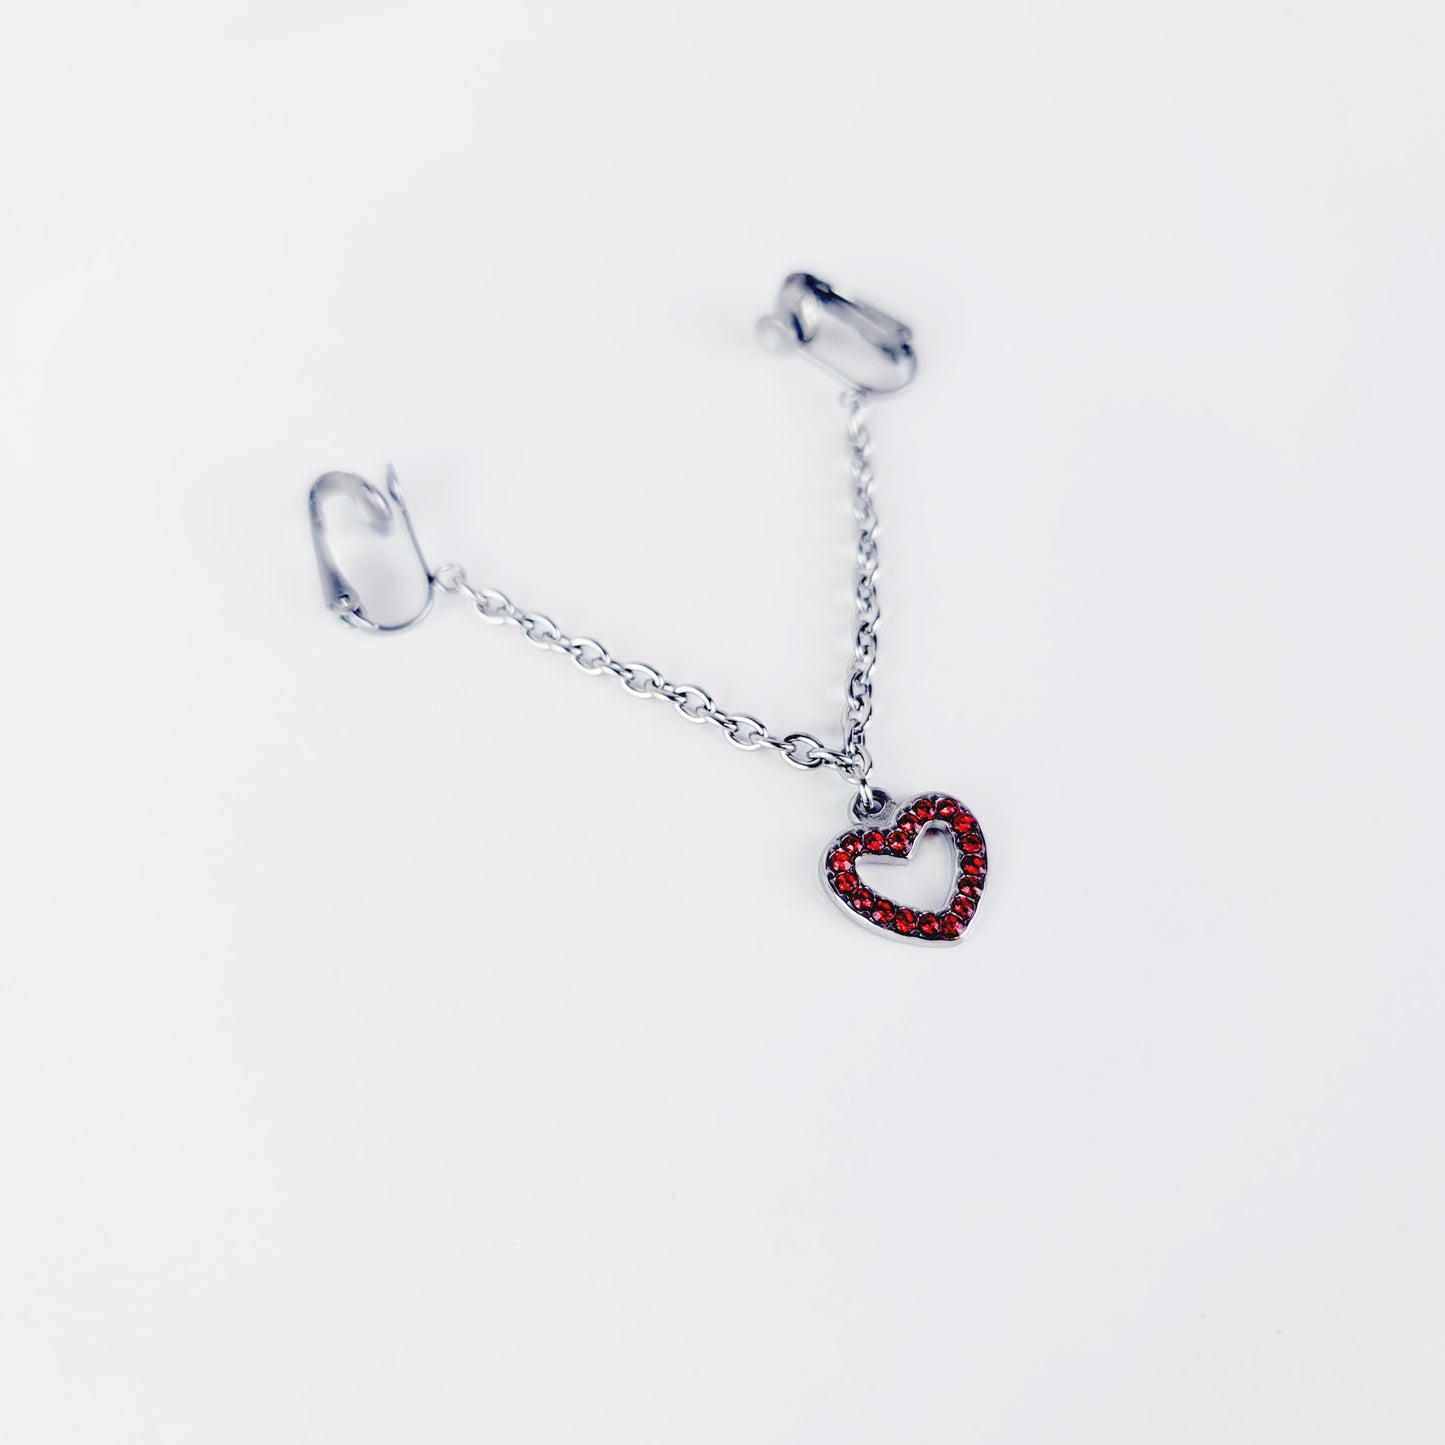 Labia Jewelry with Sparkling Heart. Stainless Steel Non Piercing Labia Chain Dangle.